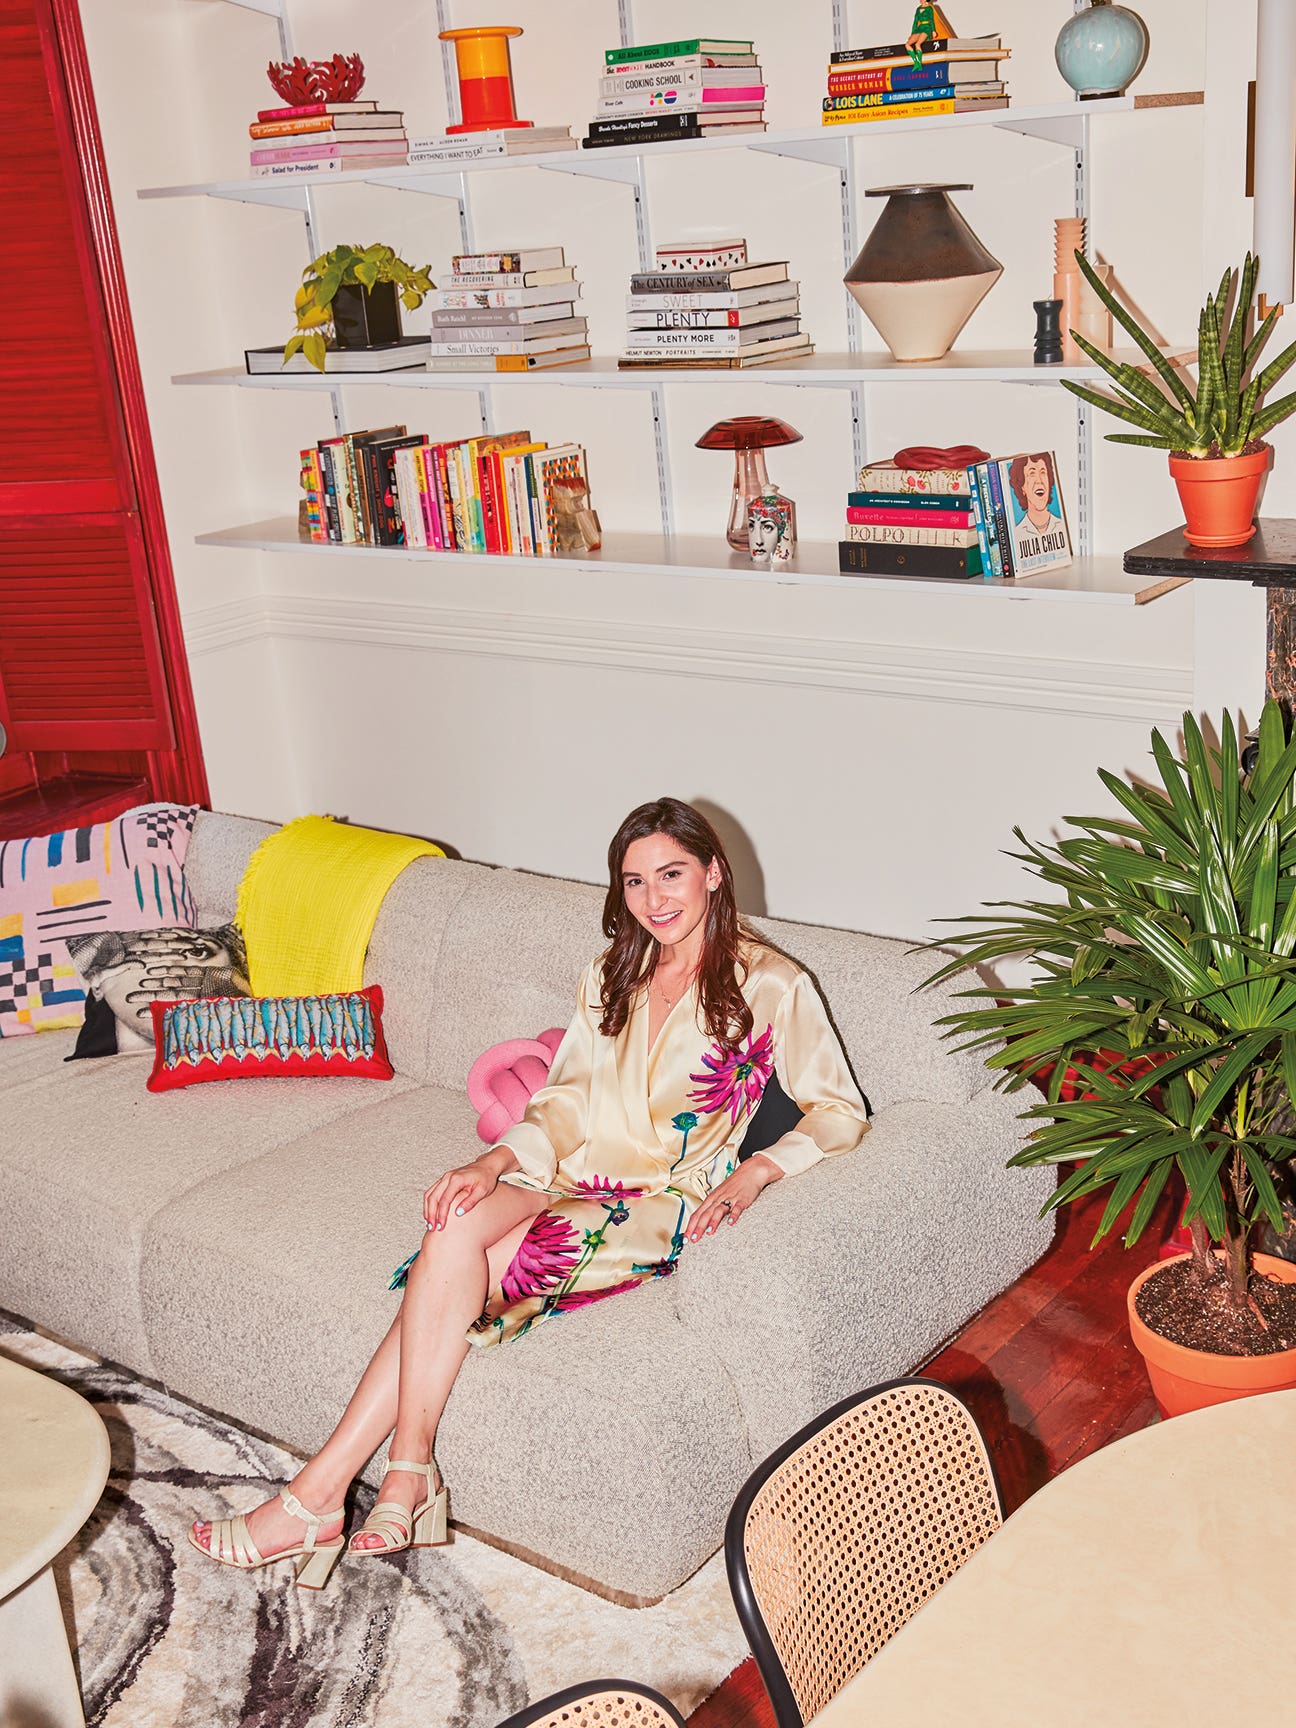 From a Fruit Chandelier to Fornasetti, Sierra Tishgart’s Home Has It All